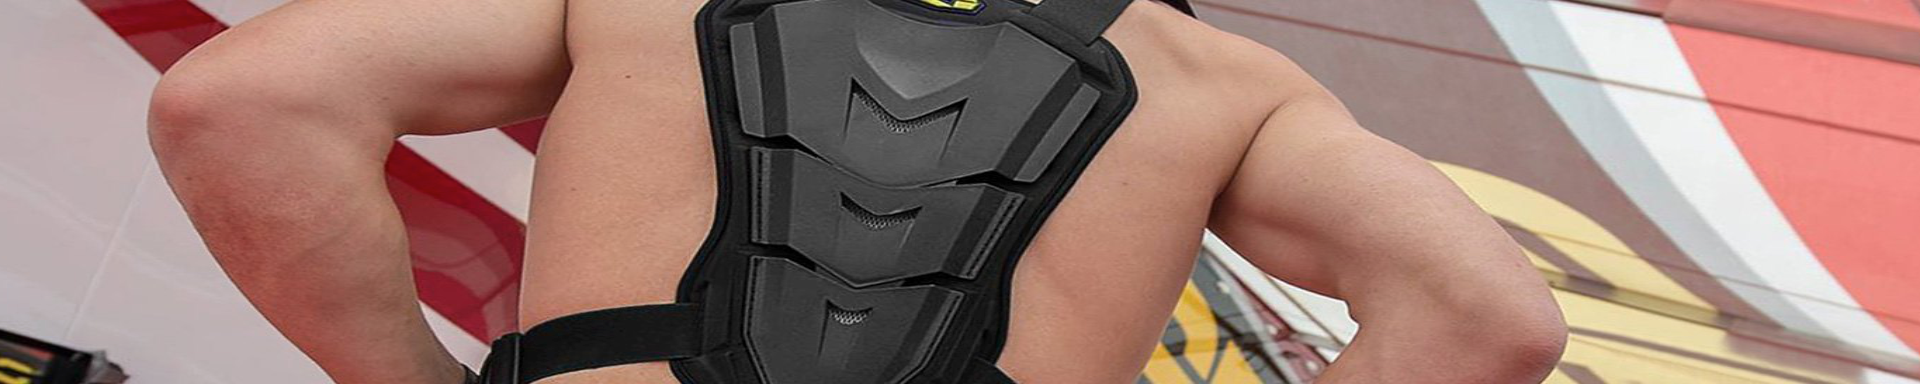 Back Protection | MunroPowersports.com | Munro Industries mp-100803030502